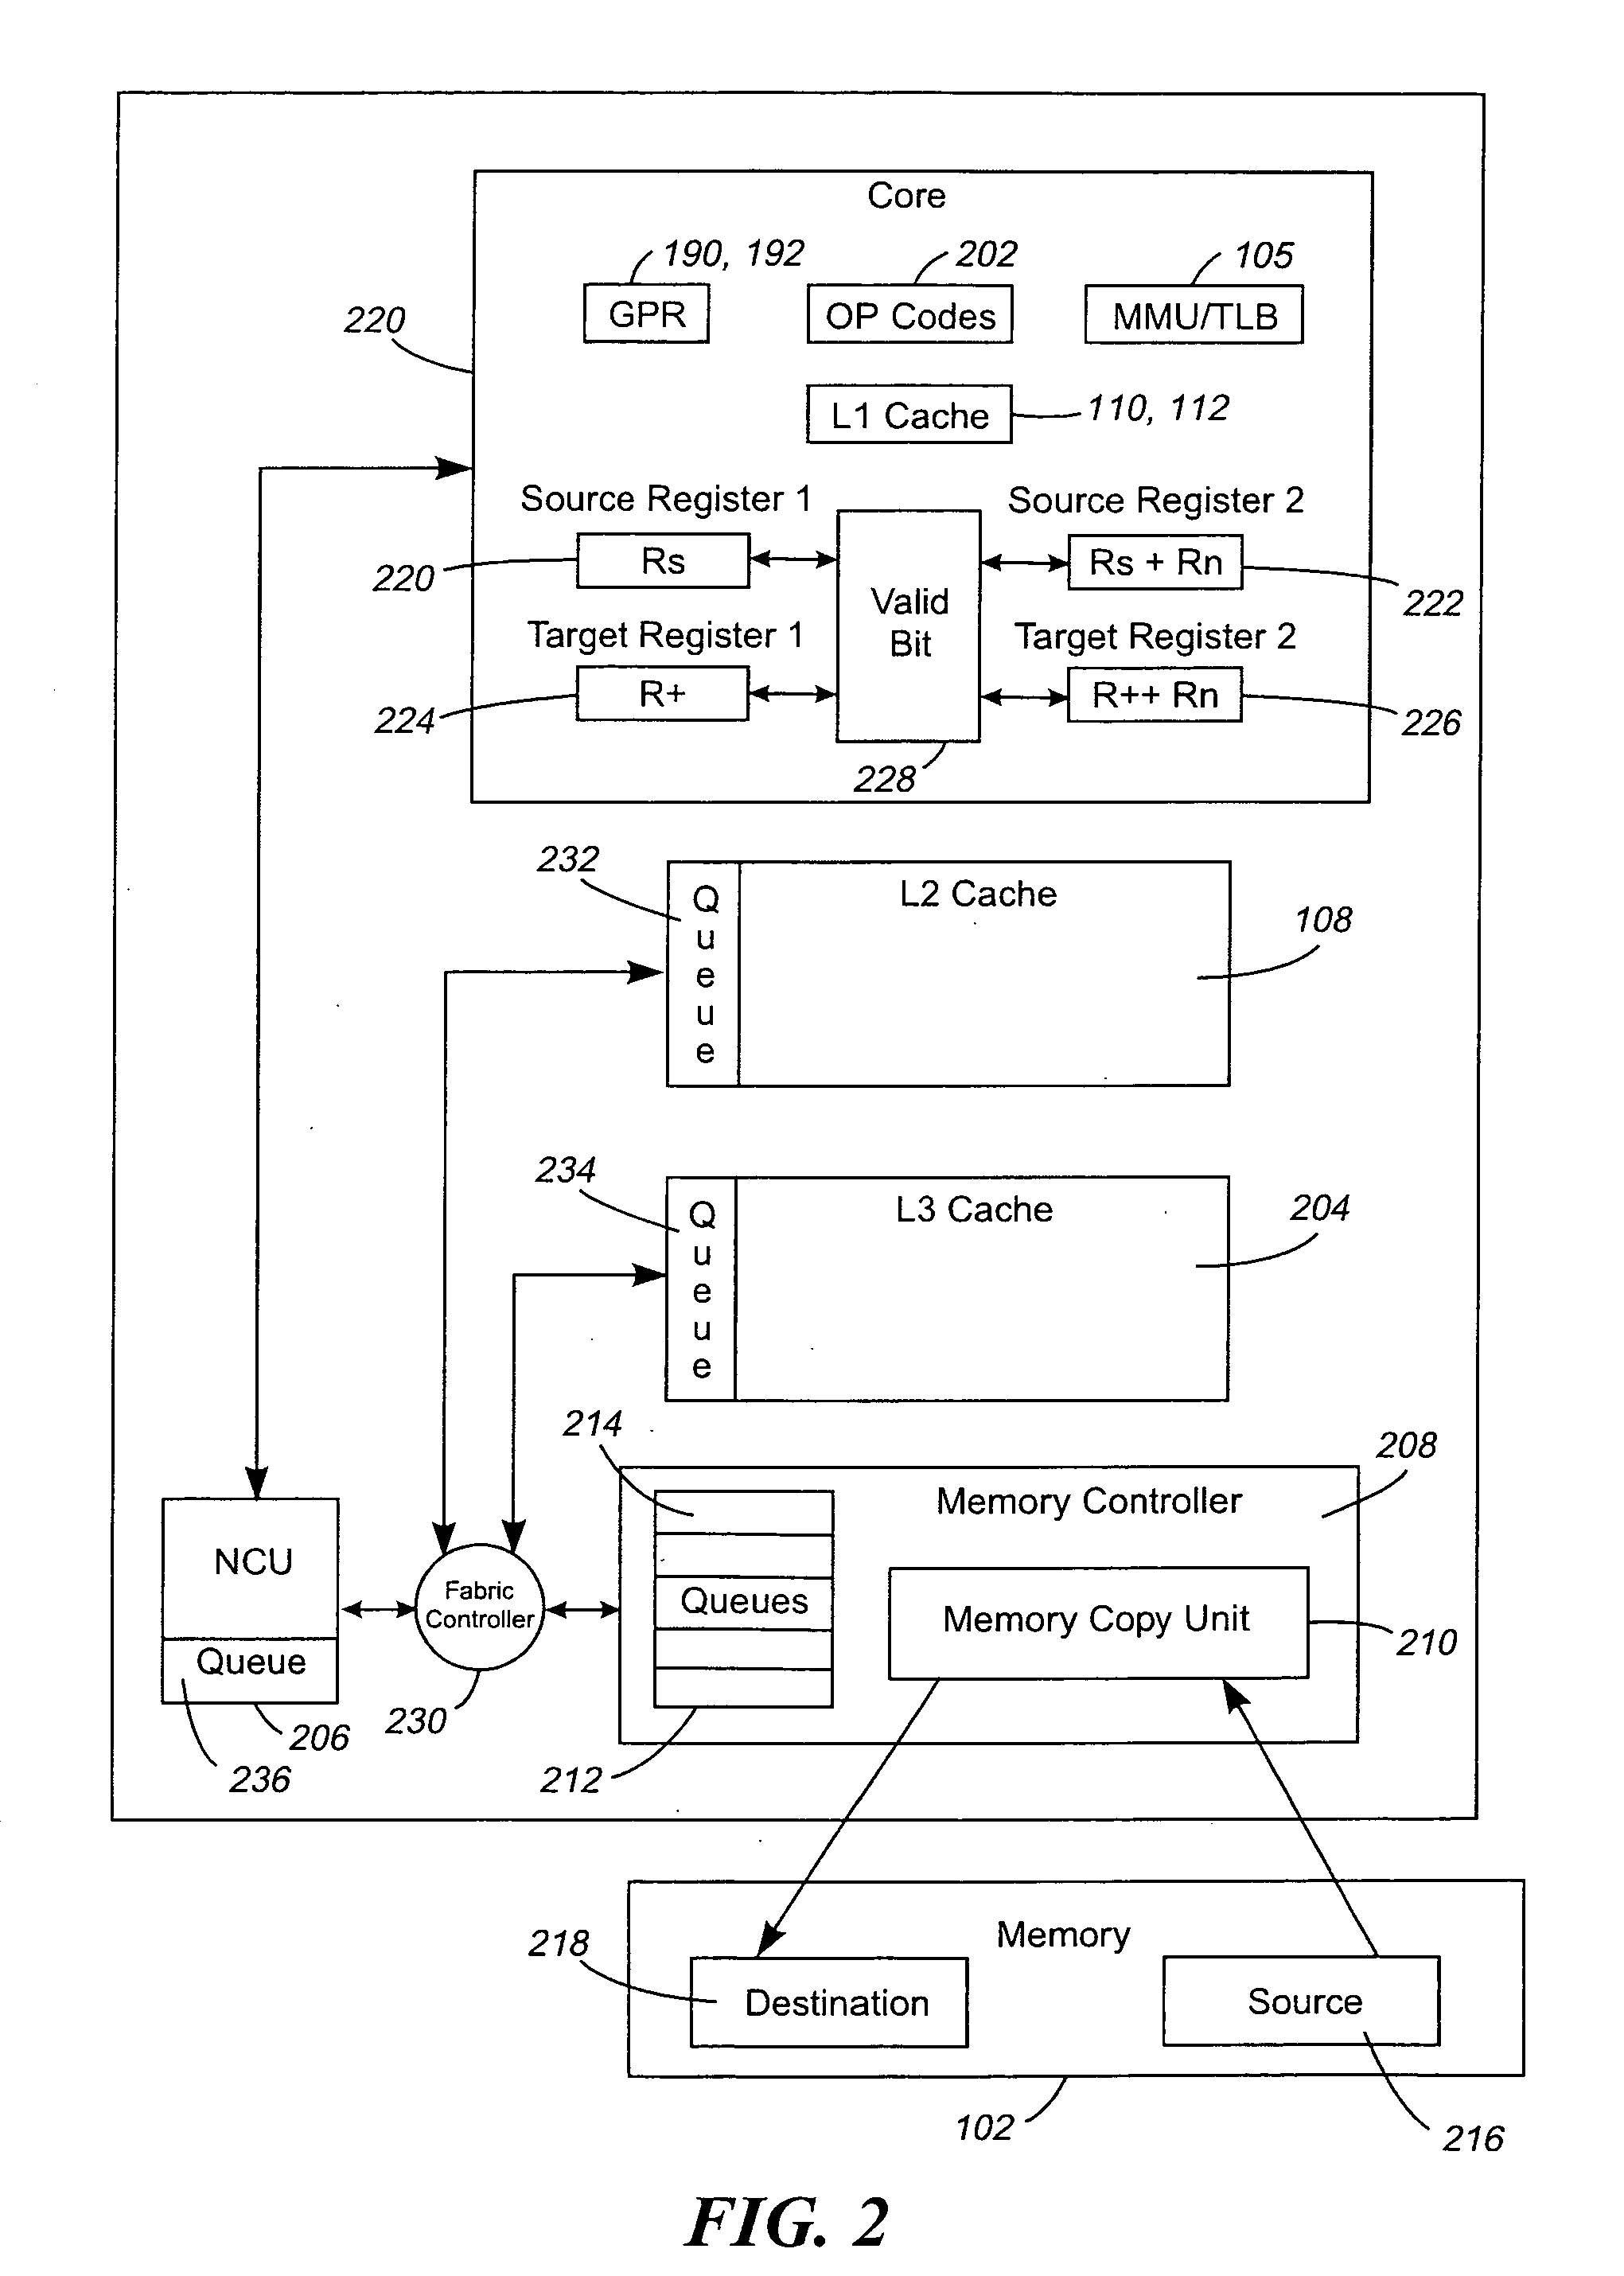 Validity of address ranges used in semi-synchronous memory copy operations